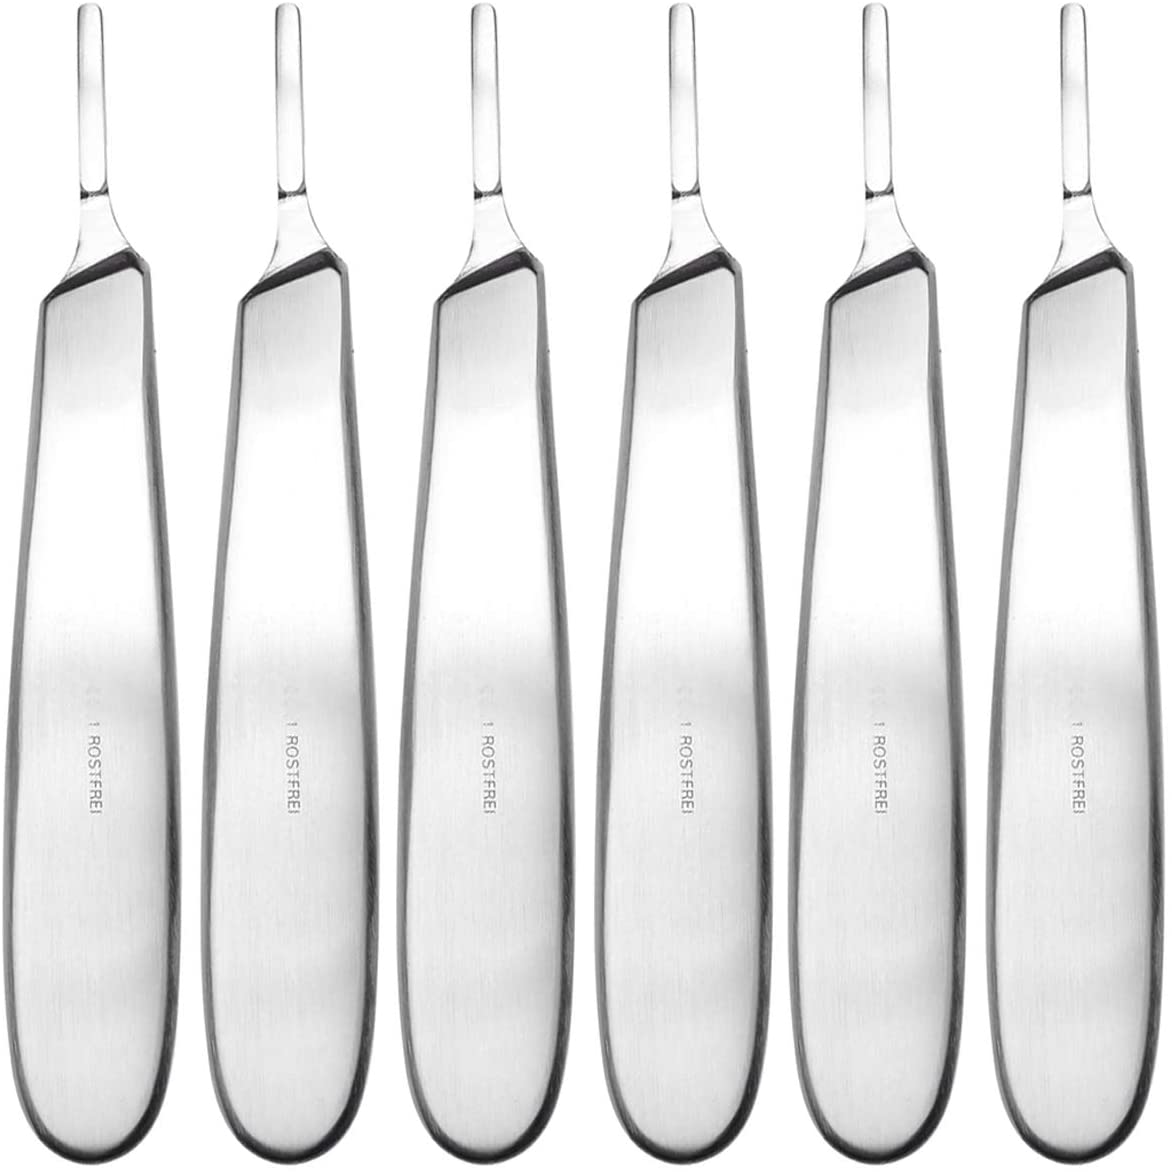 6 x Scalpel Holder with Round Handle Figure 3 - Scalpel Handle - Blade Holder for Disposable Slatella Blades - Stainless Steel